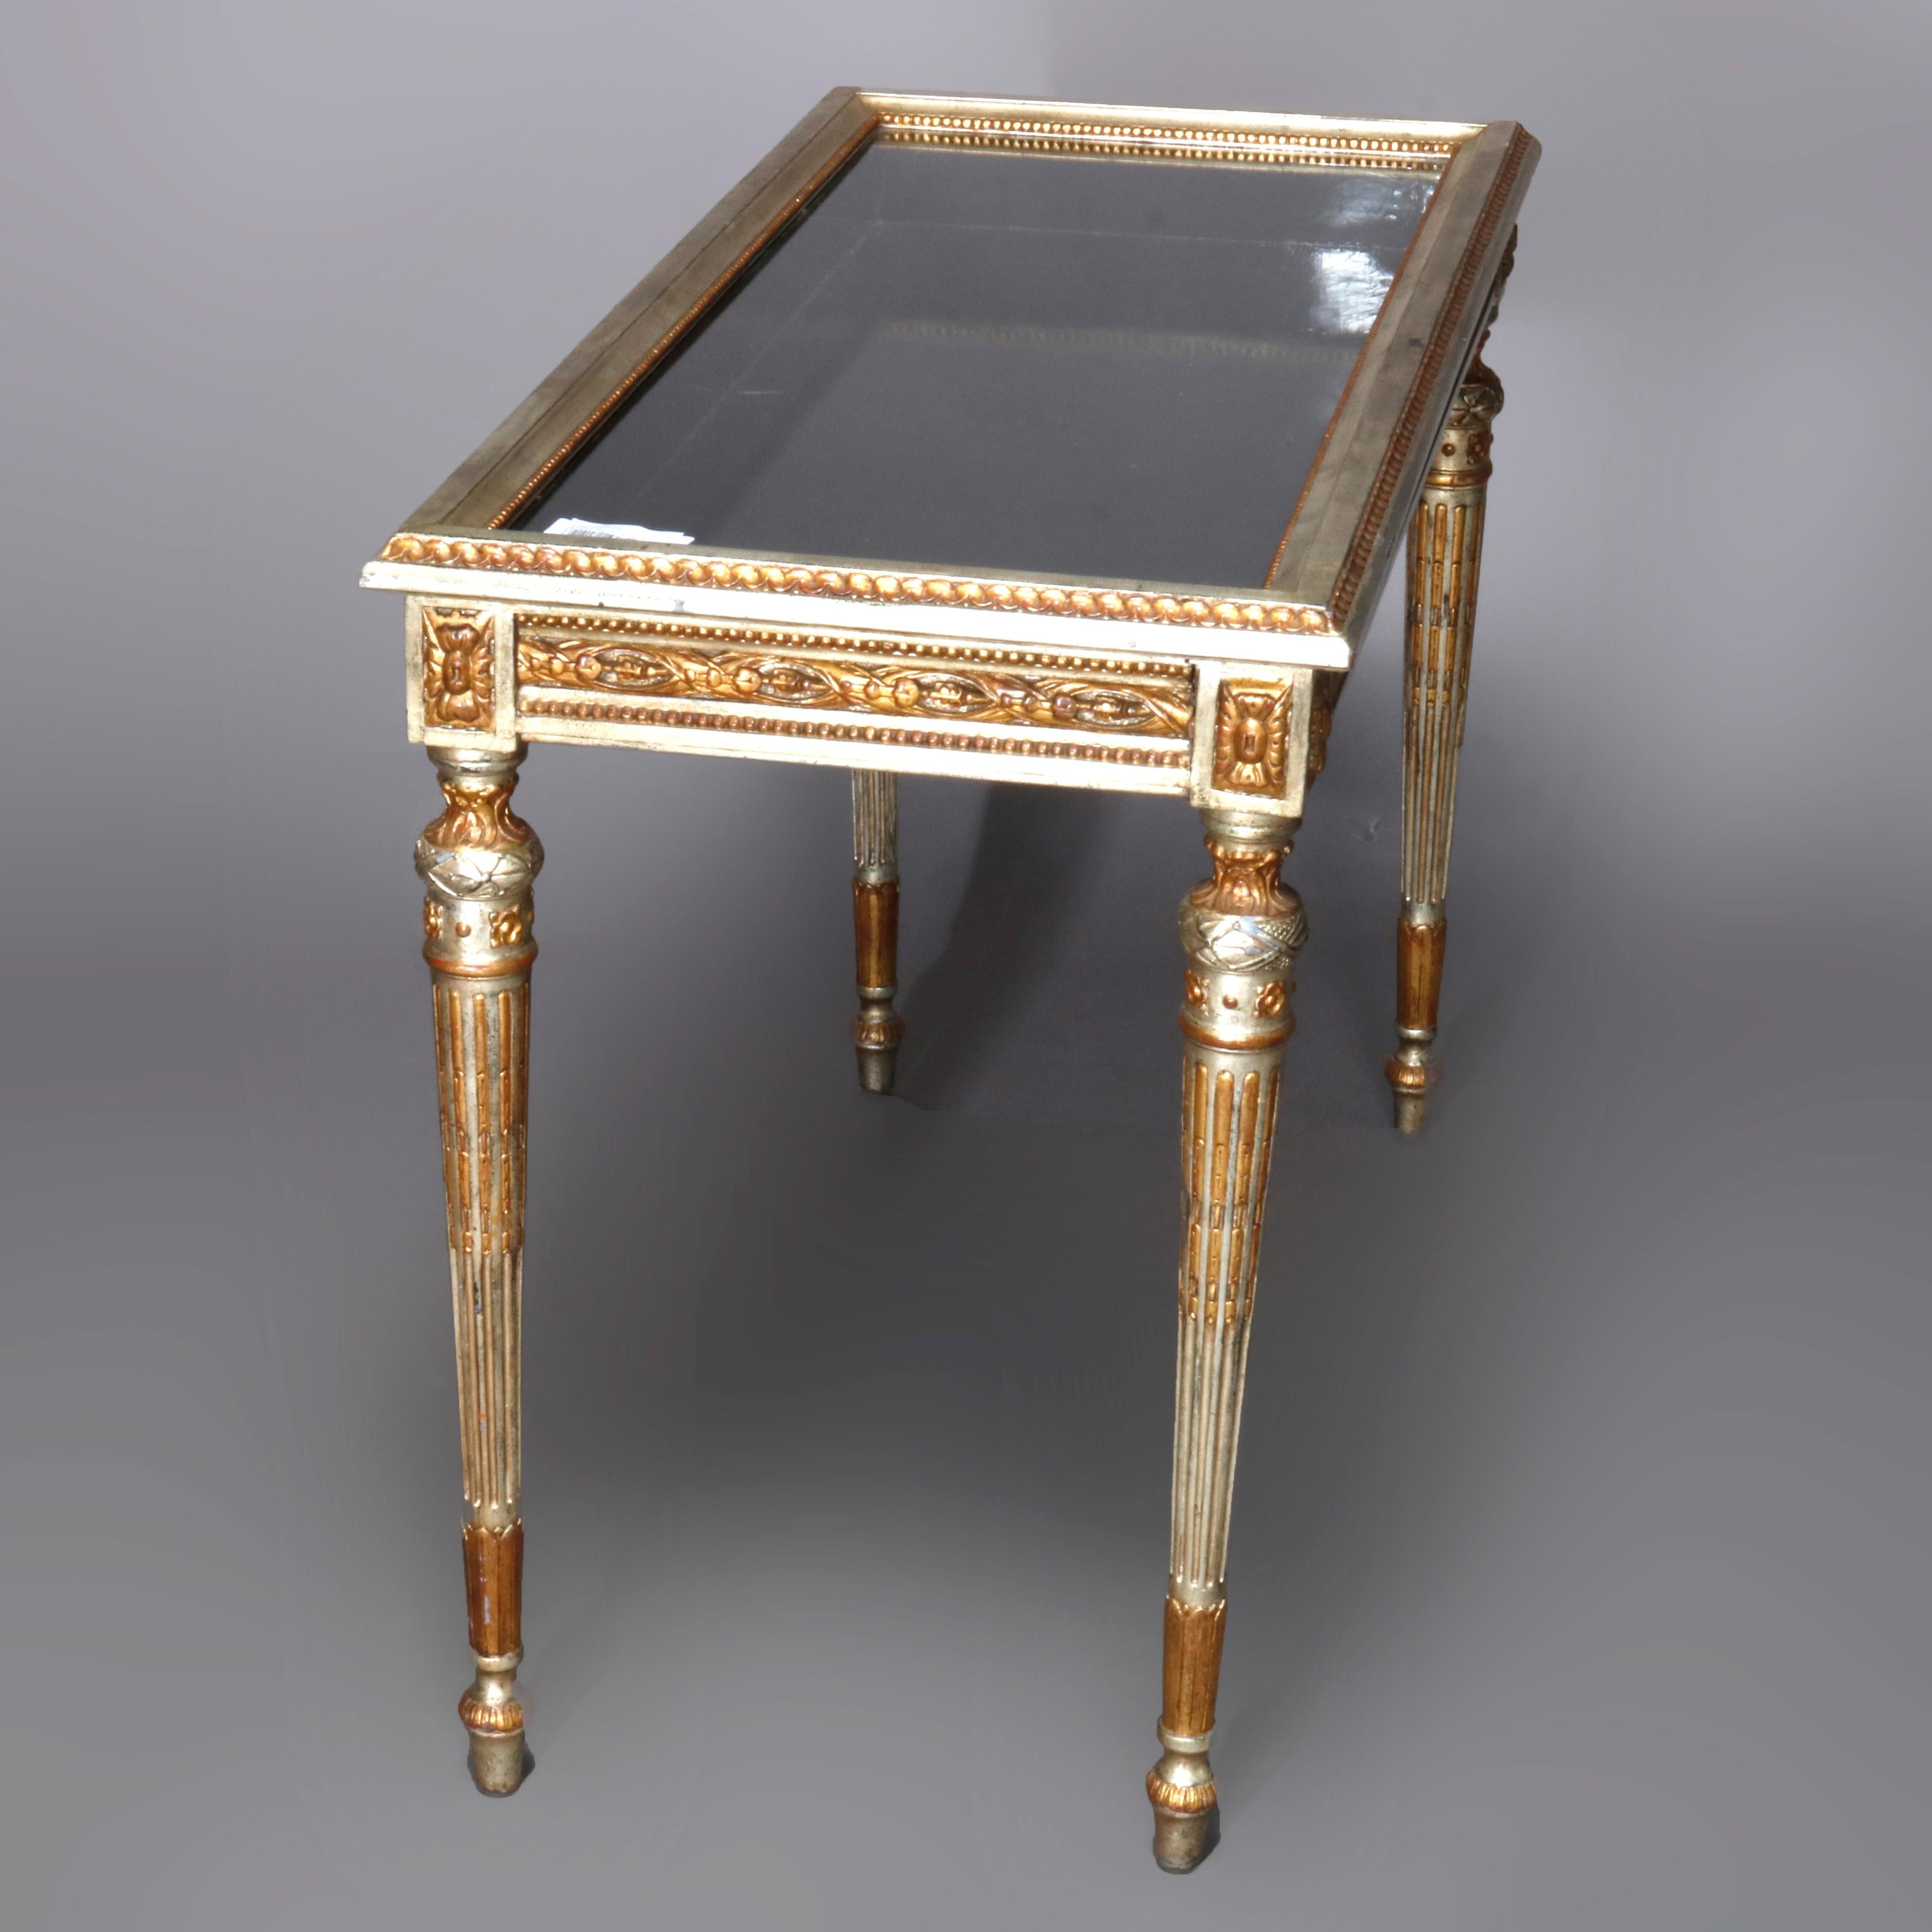 Carved Vintage French Louis XV Silver and Gold Giltwood Lift Top Vitrine, circa 1890